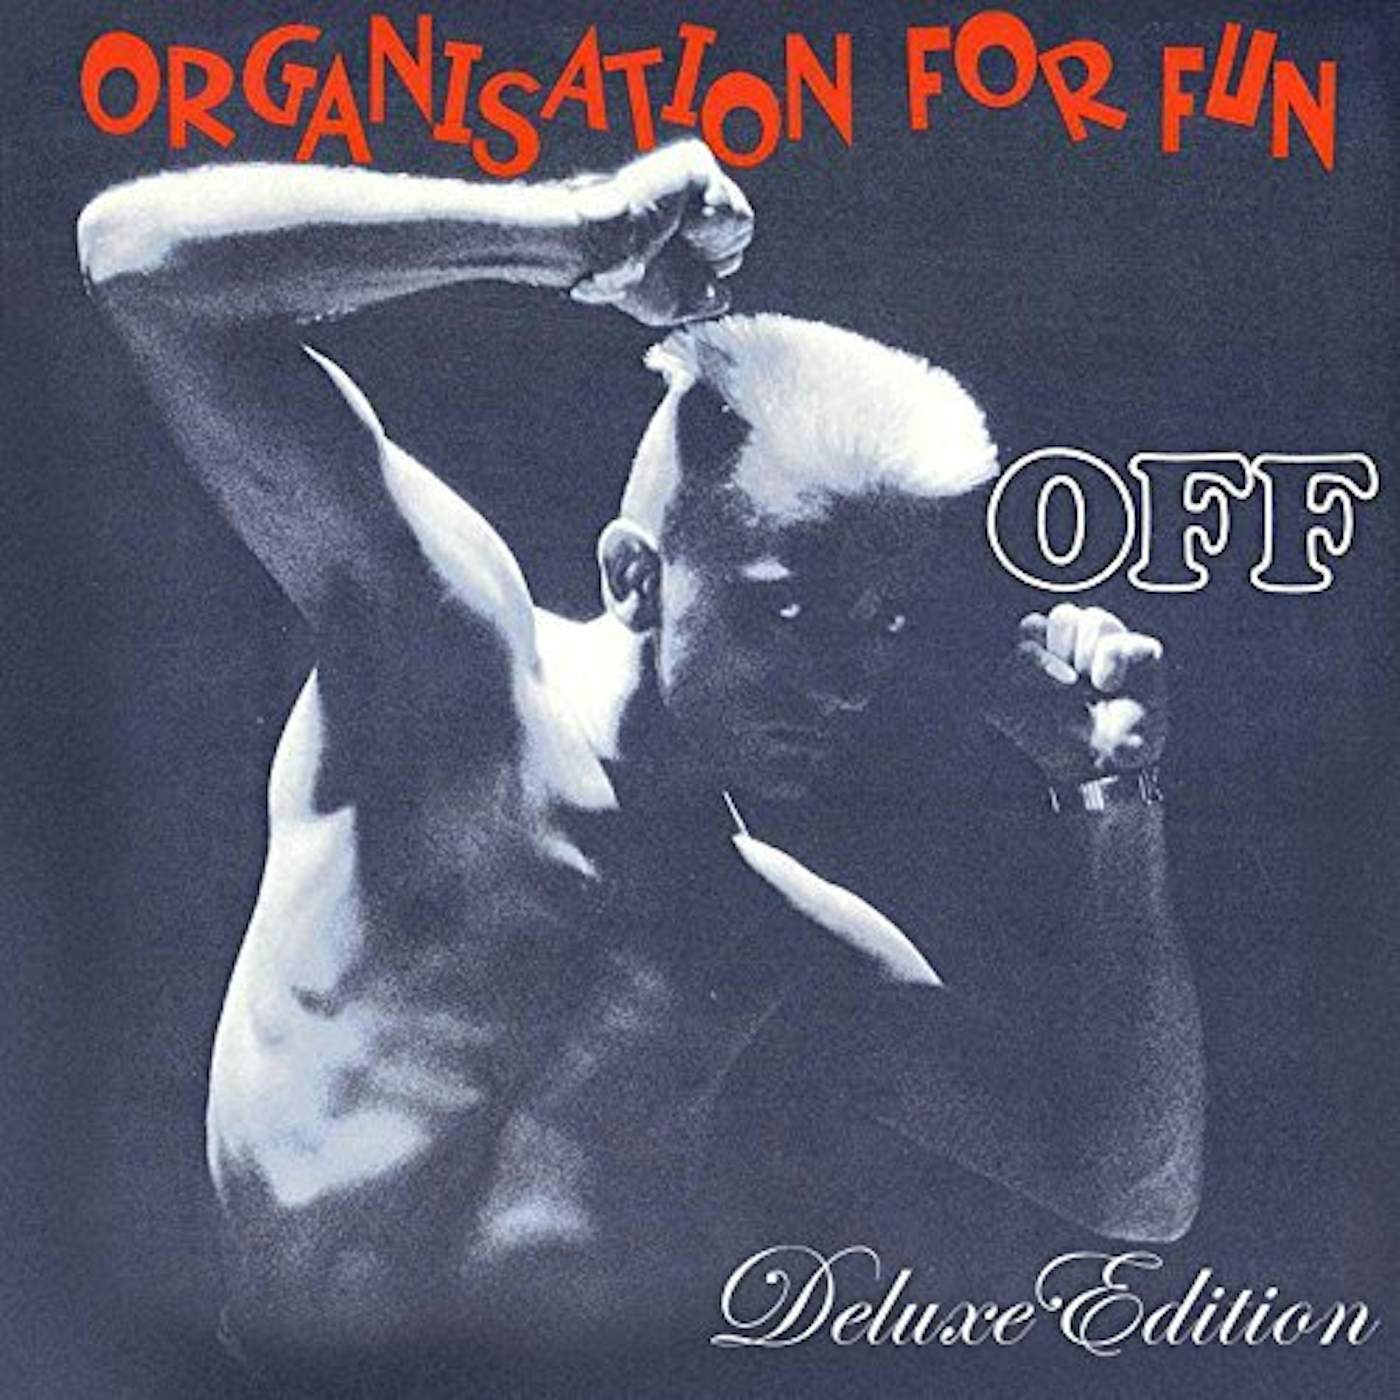 OFF ORGANISATION FOR FUN CD